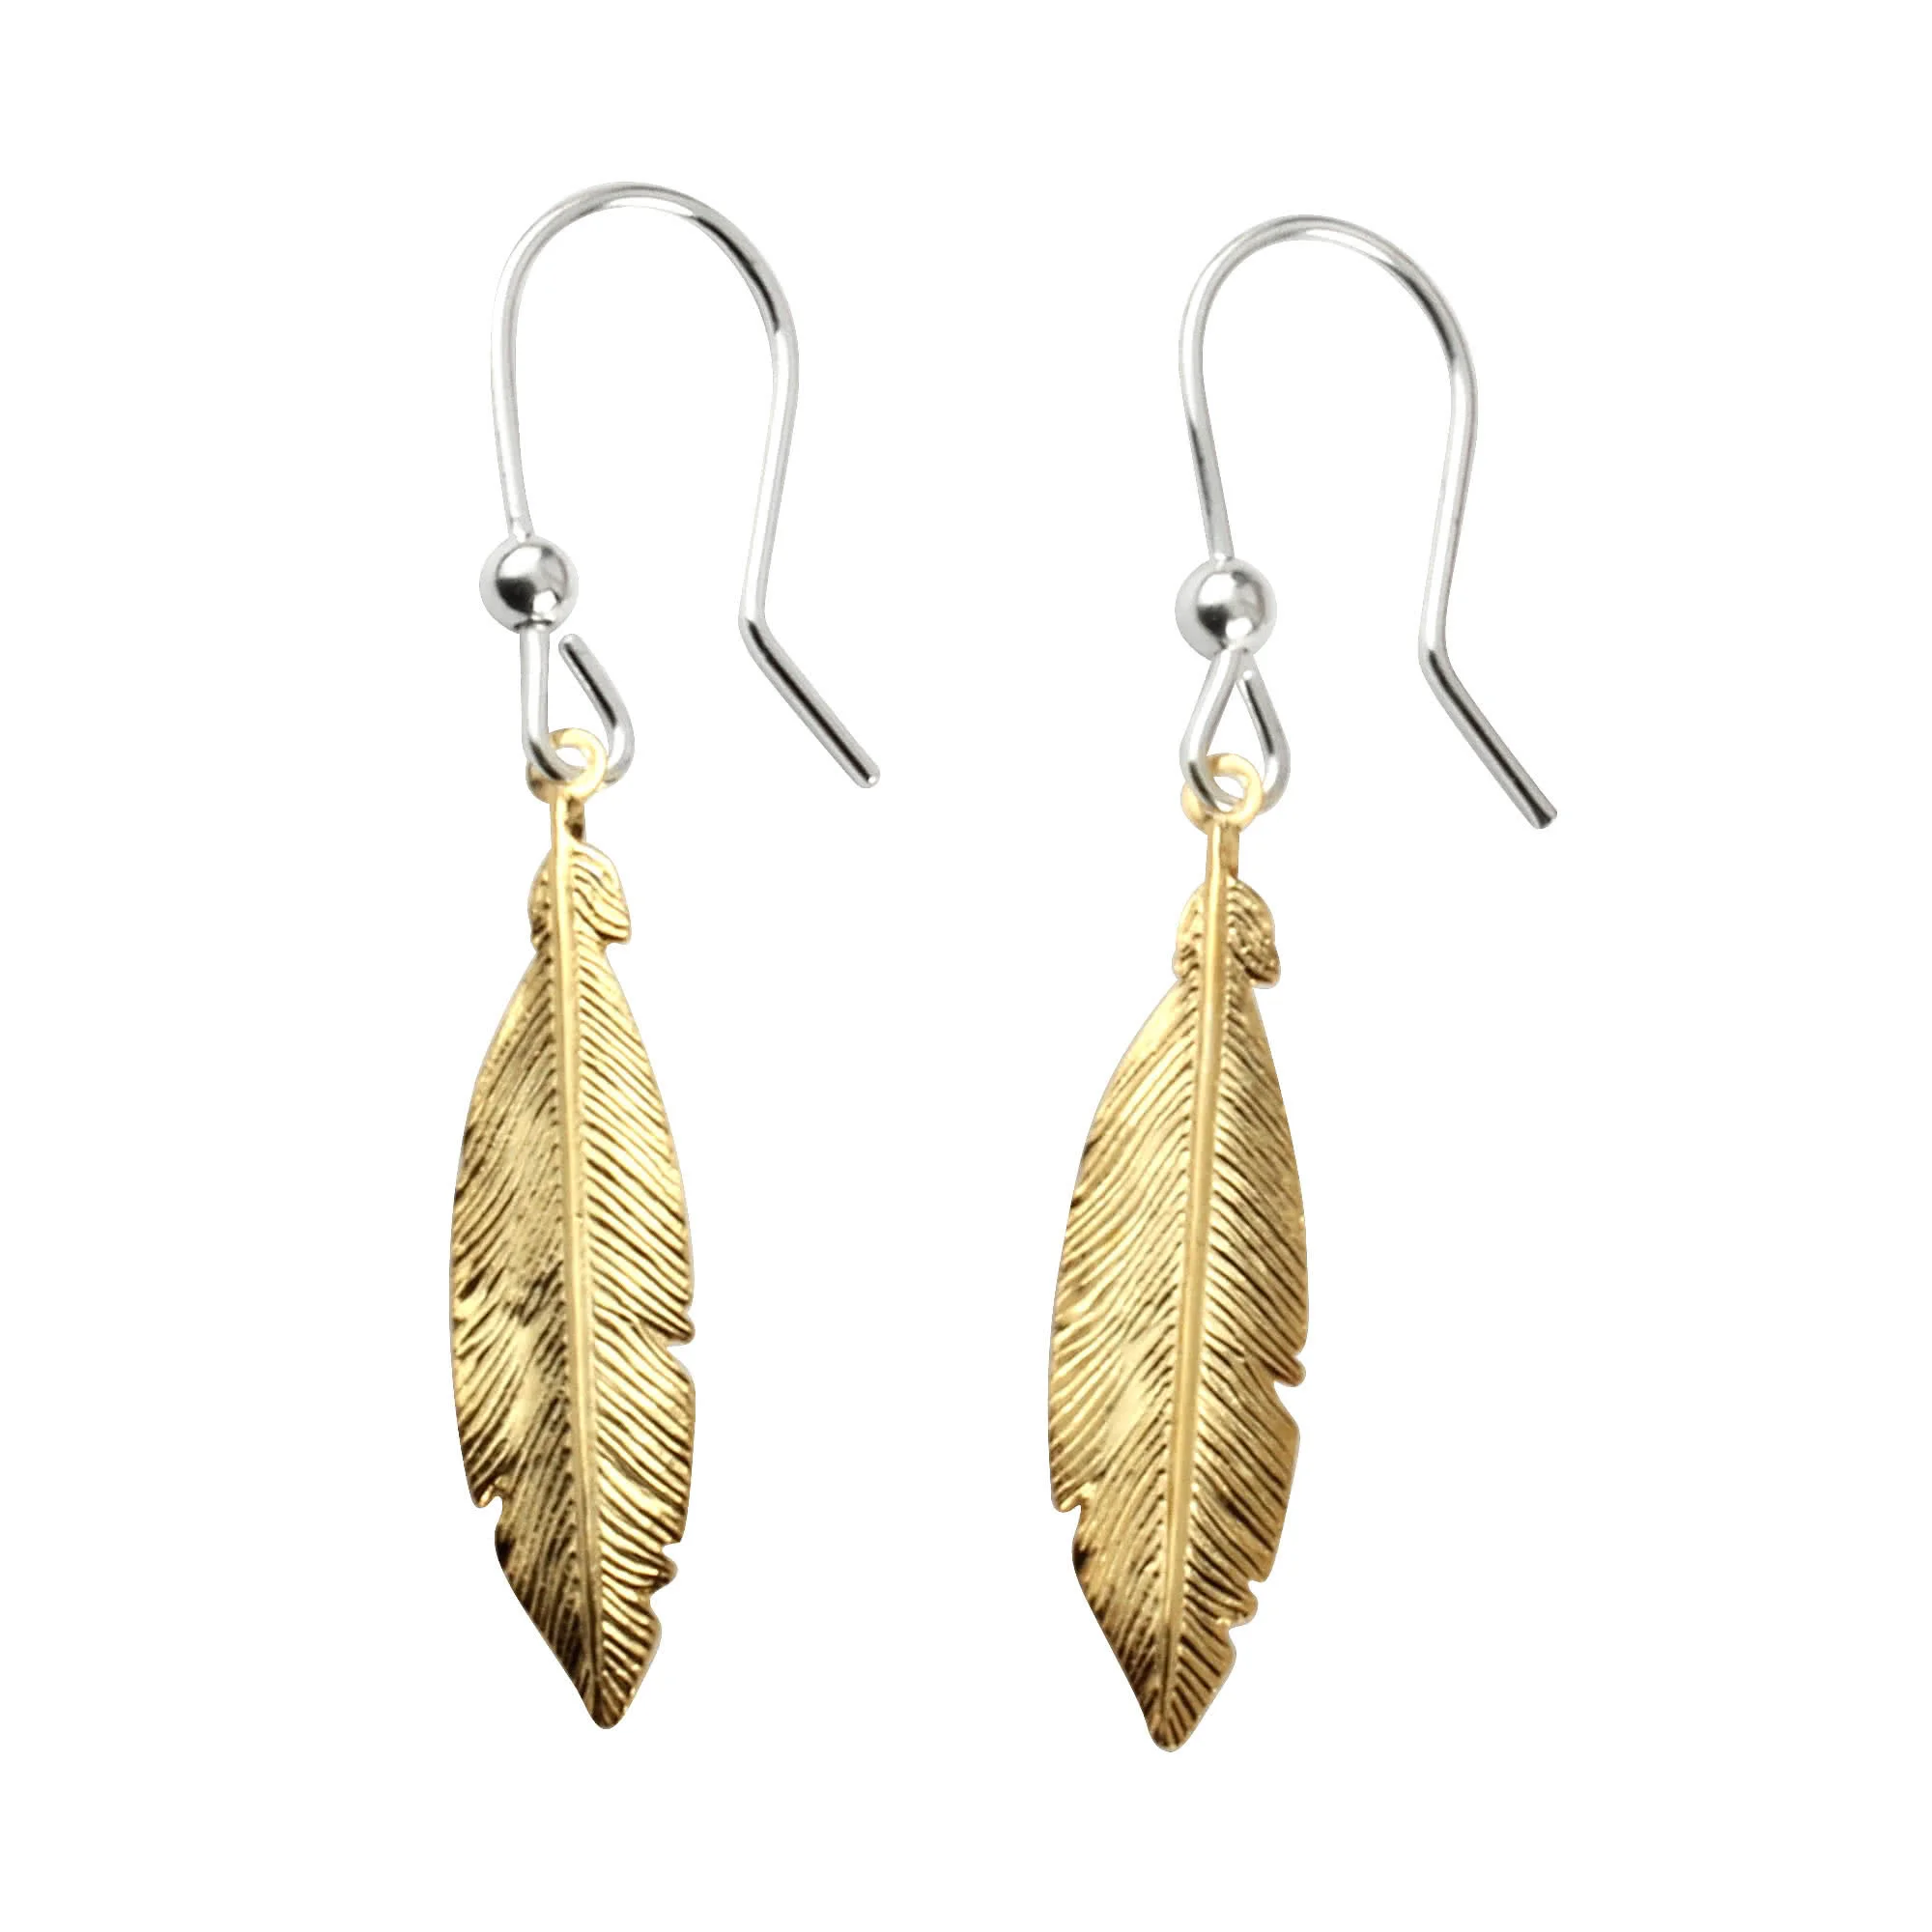 RTS ☆ Love Me Some Feathers Earrings – Turquoise Tuesday